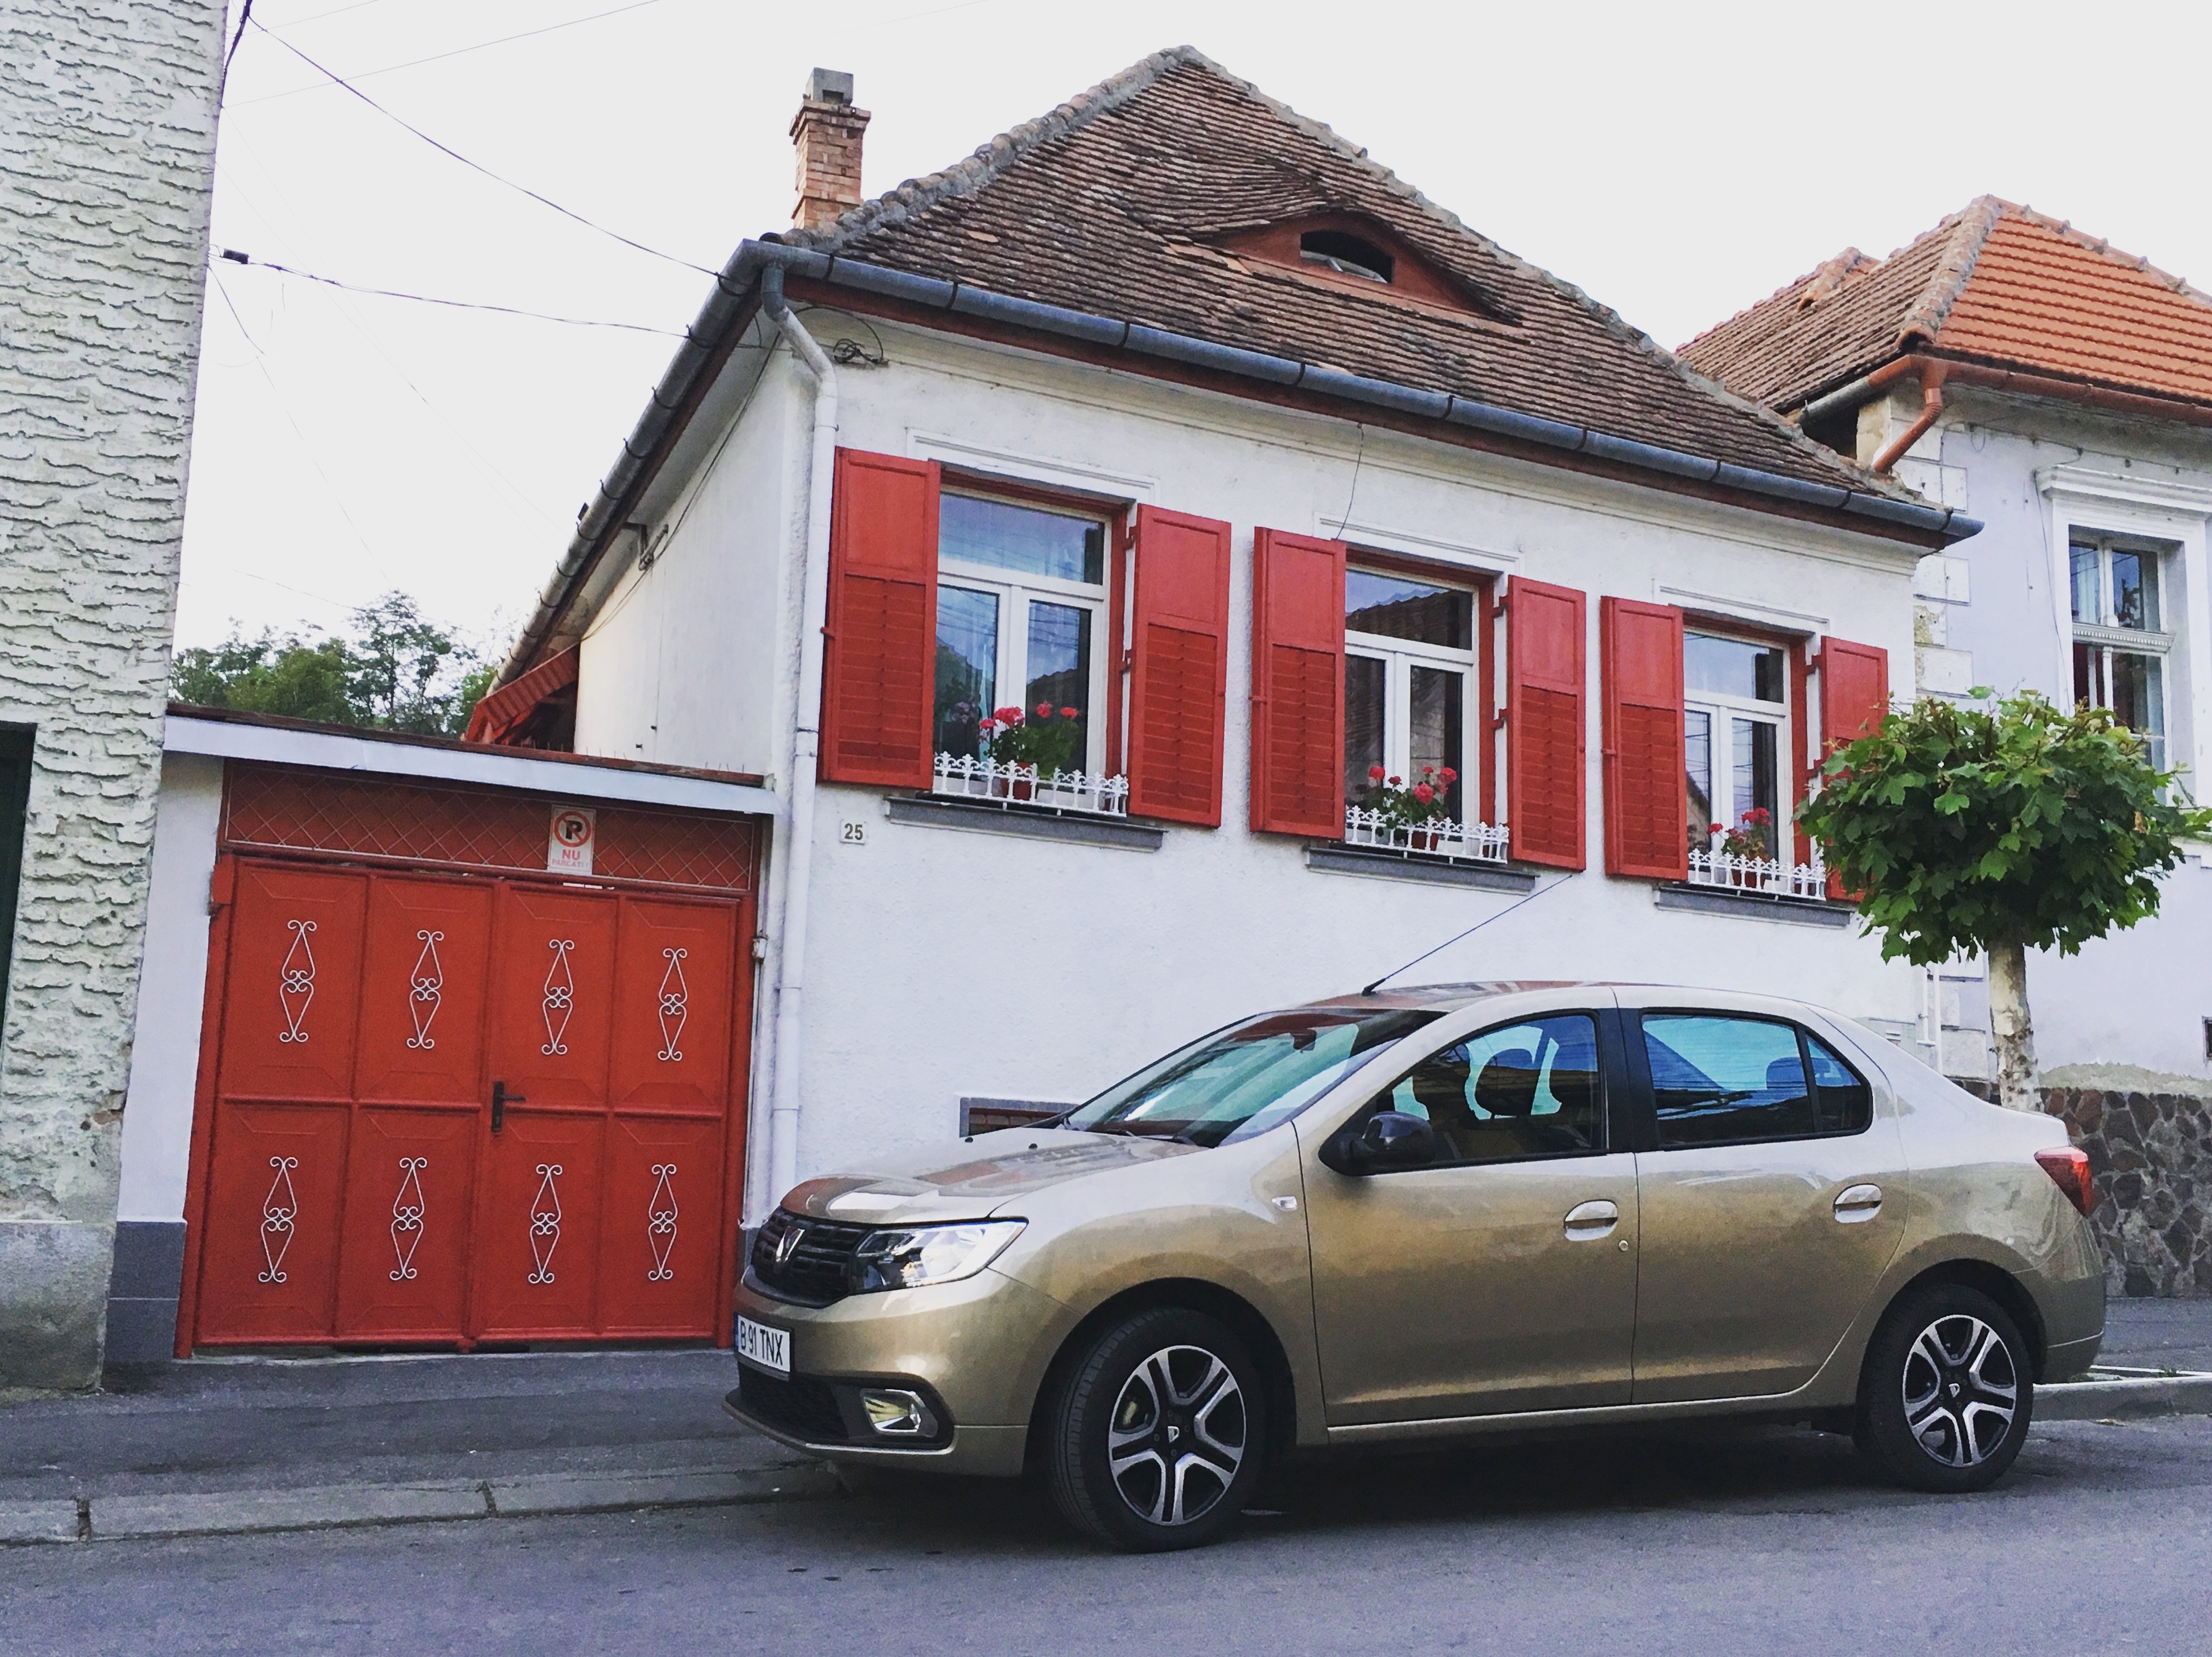 10 countries in 10 days in a Dacia Logan – 1/10: Romania – Best Selling Cars  Blog